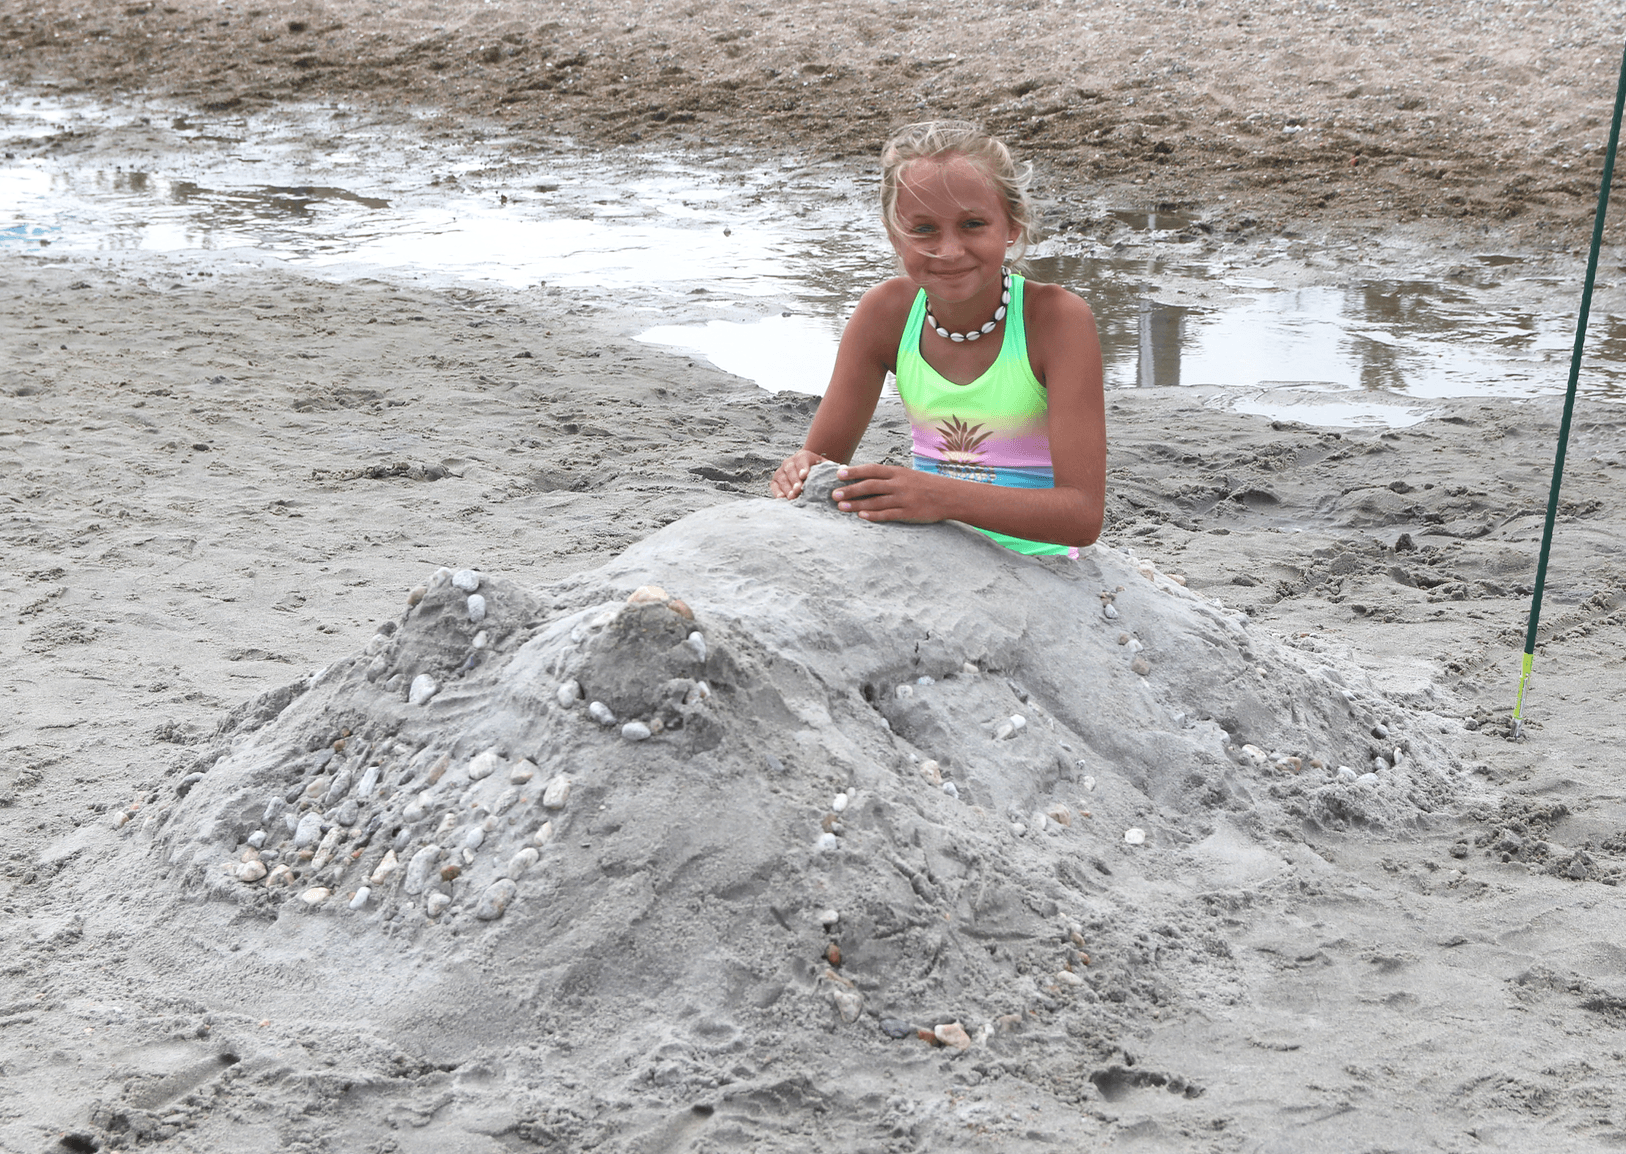 Sand Blast at Tod's Point was sponsored by the Greenwich Dept of Parks & Rec and the Greenwich Arts Council. July 27, 2019 Photo: Leslie Yager